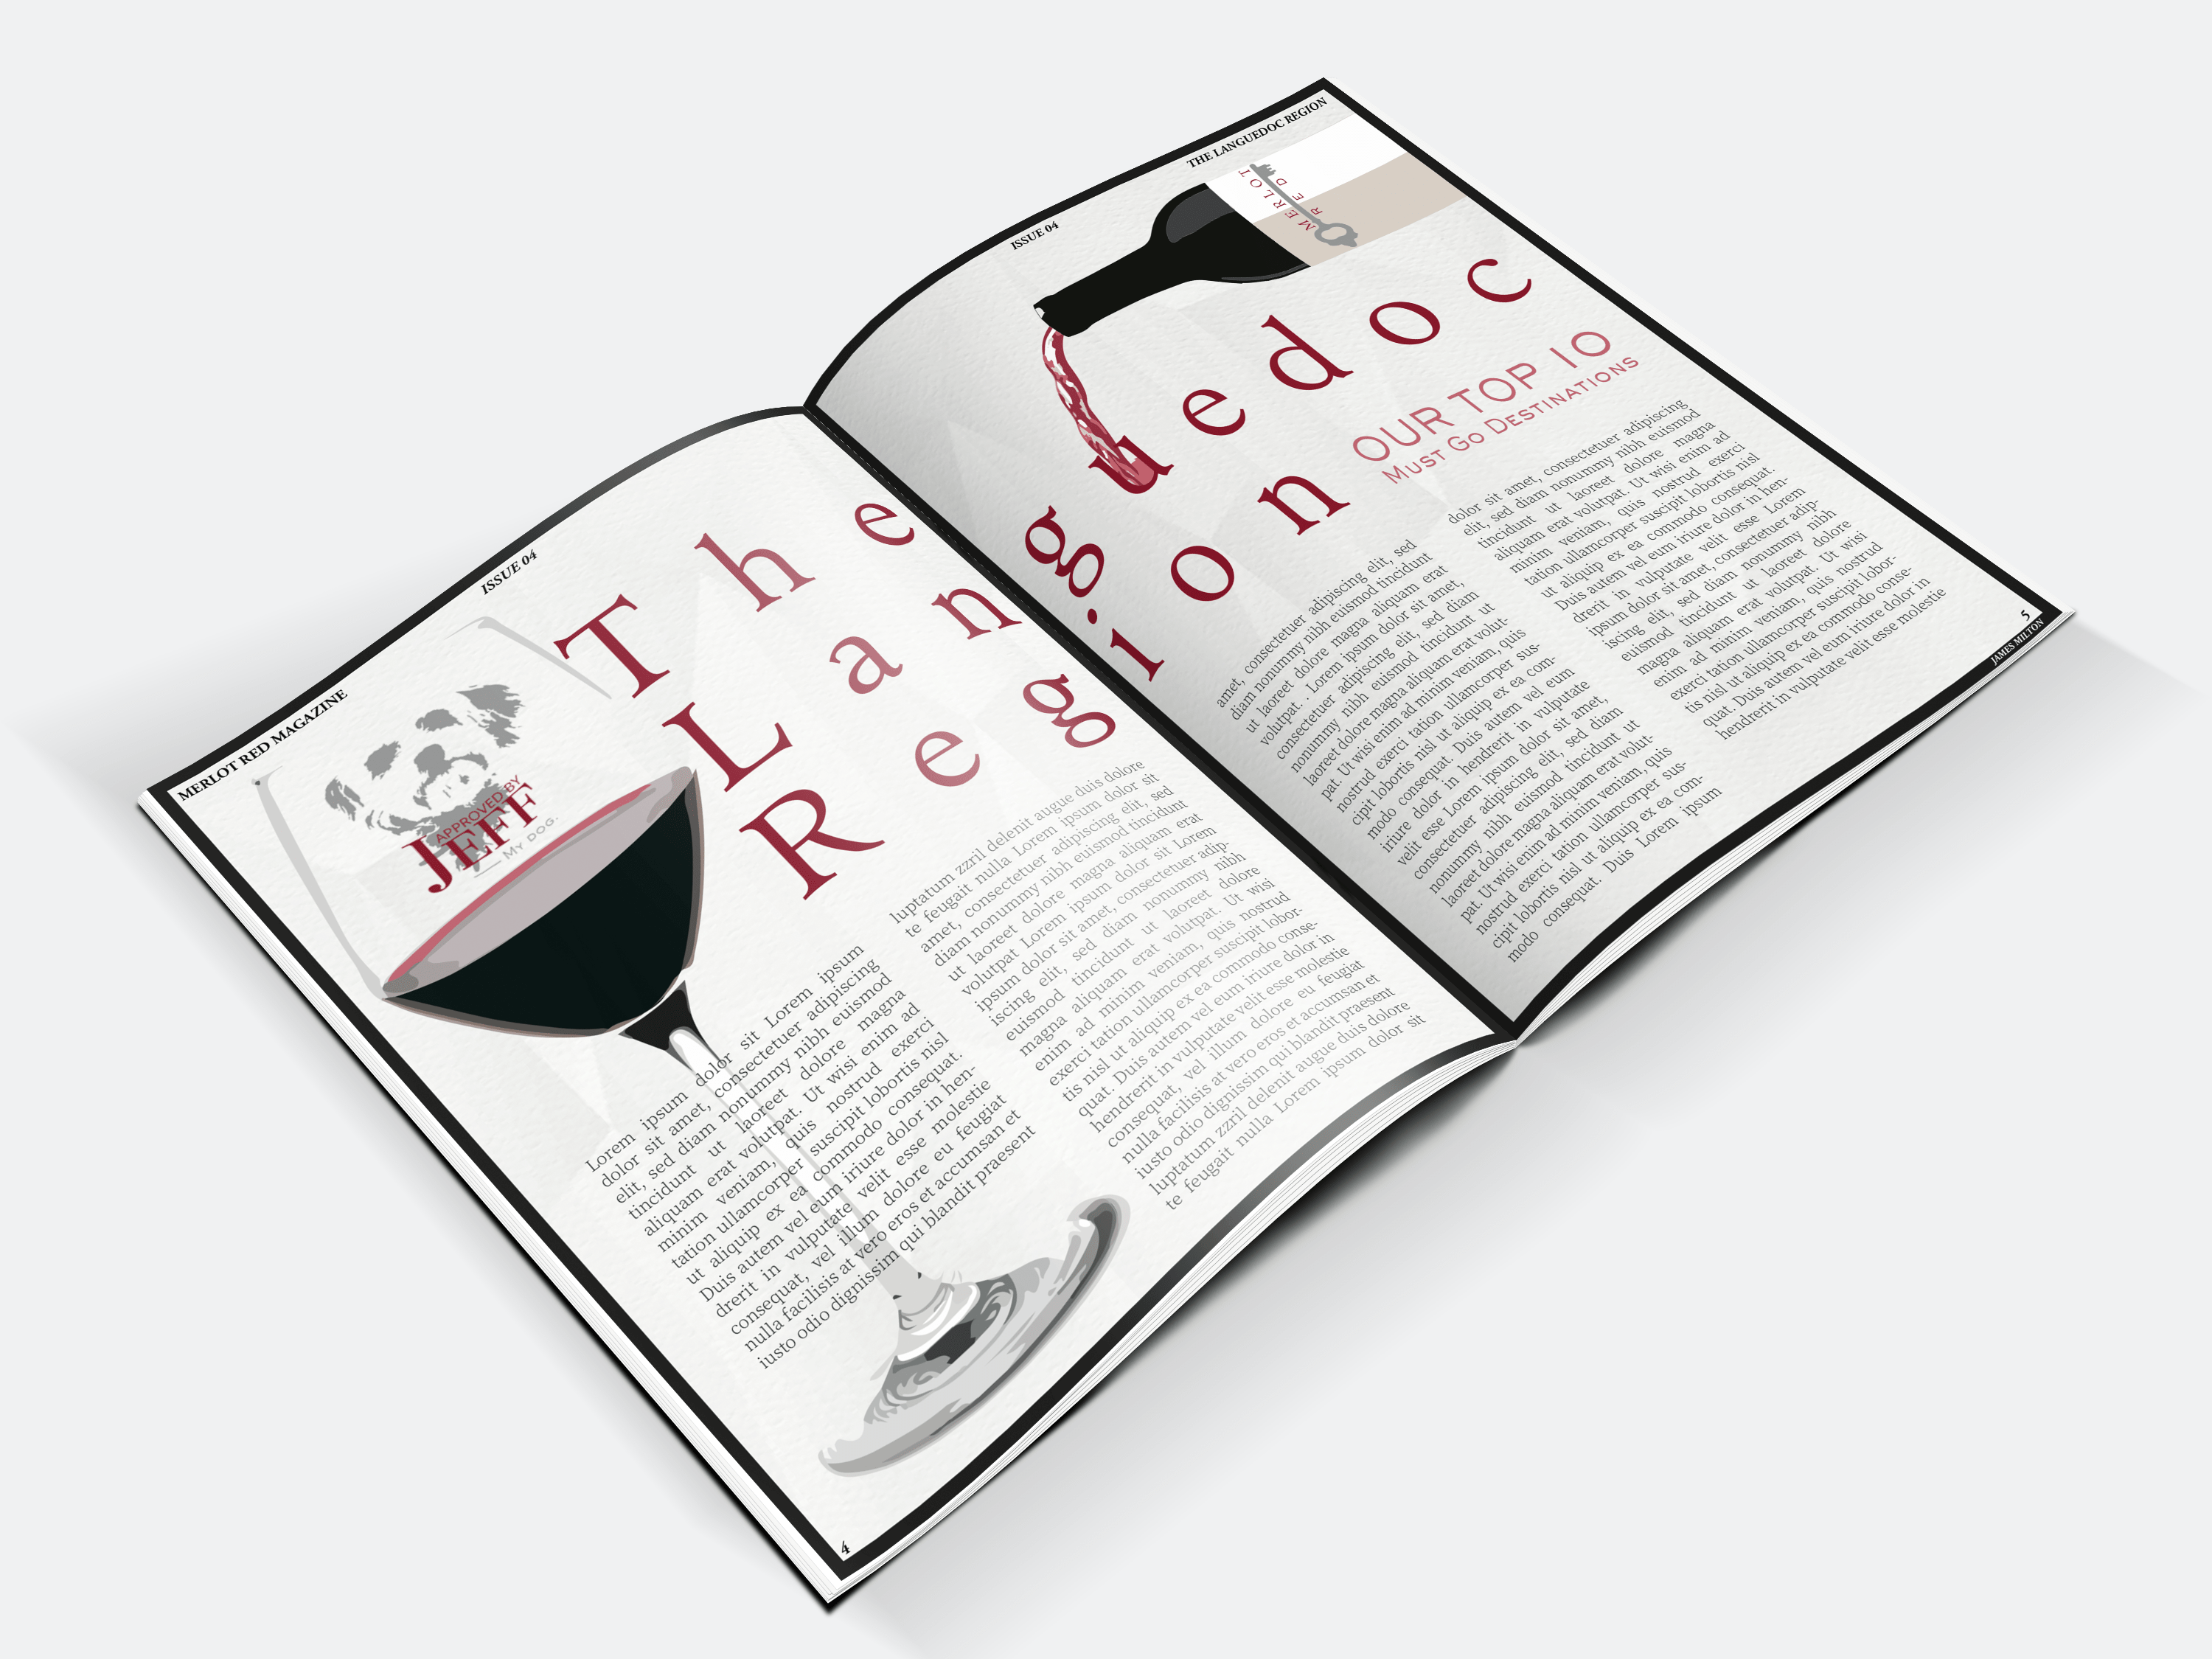 Merlot Red Magazine: A Study in Color and Theme